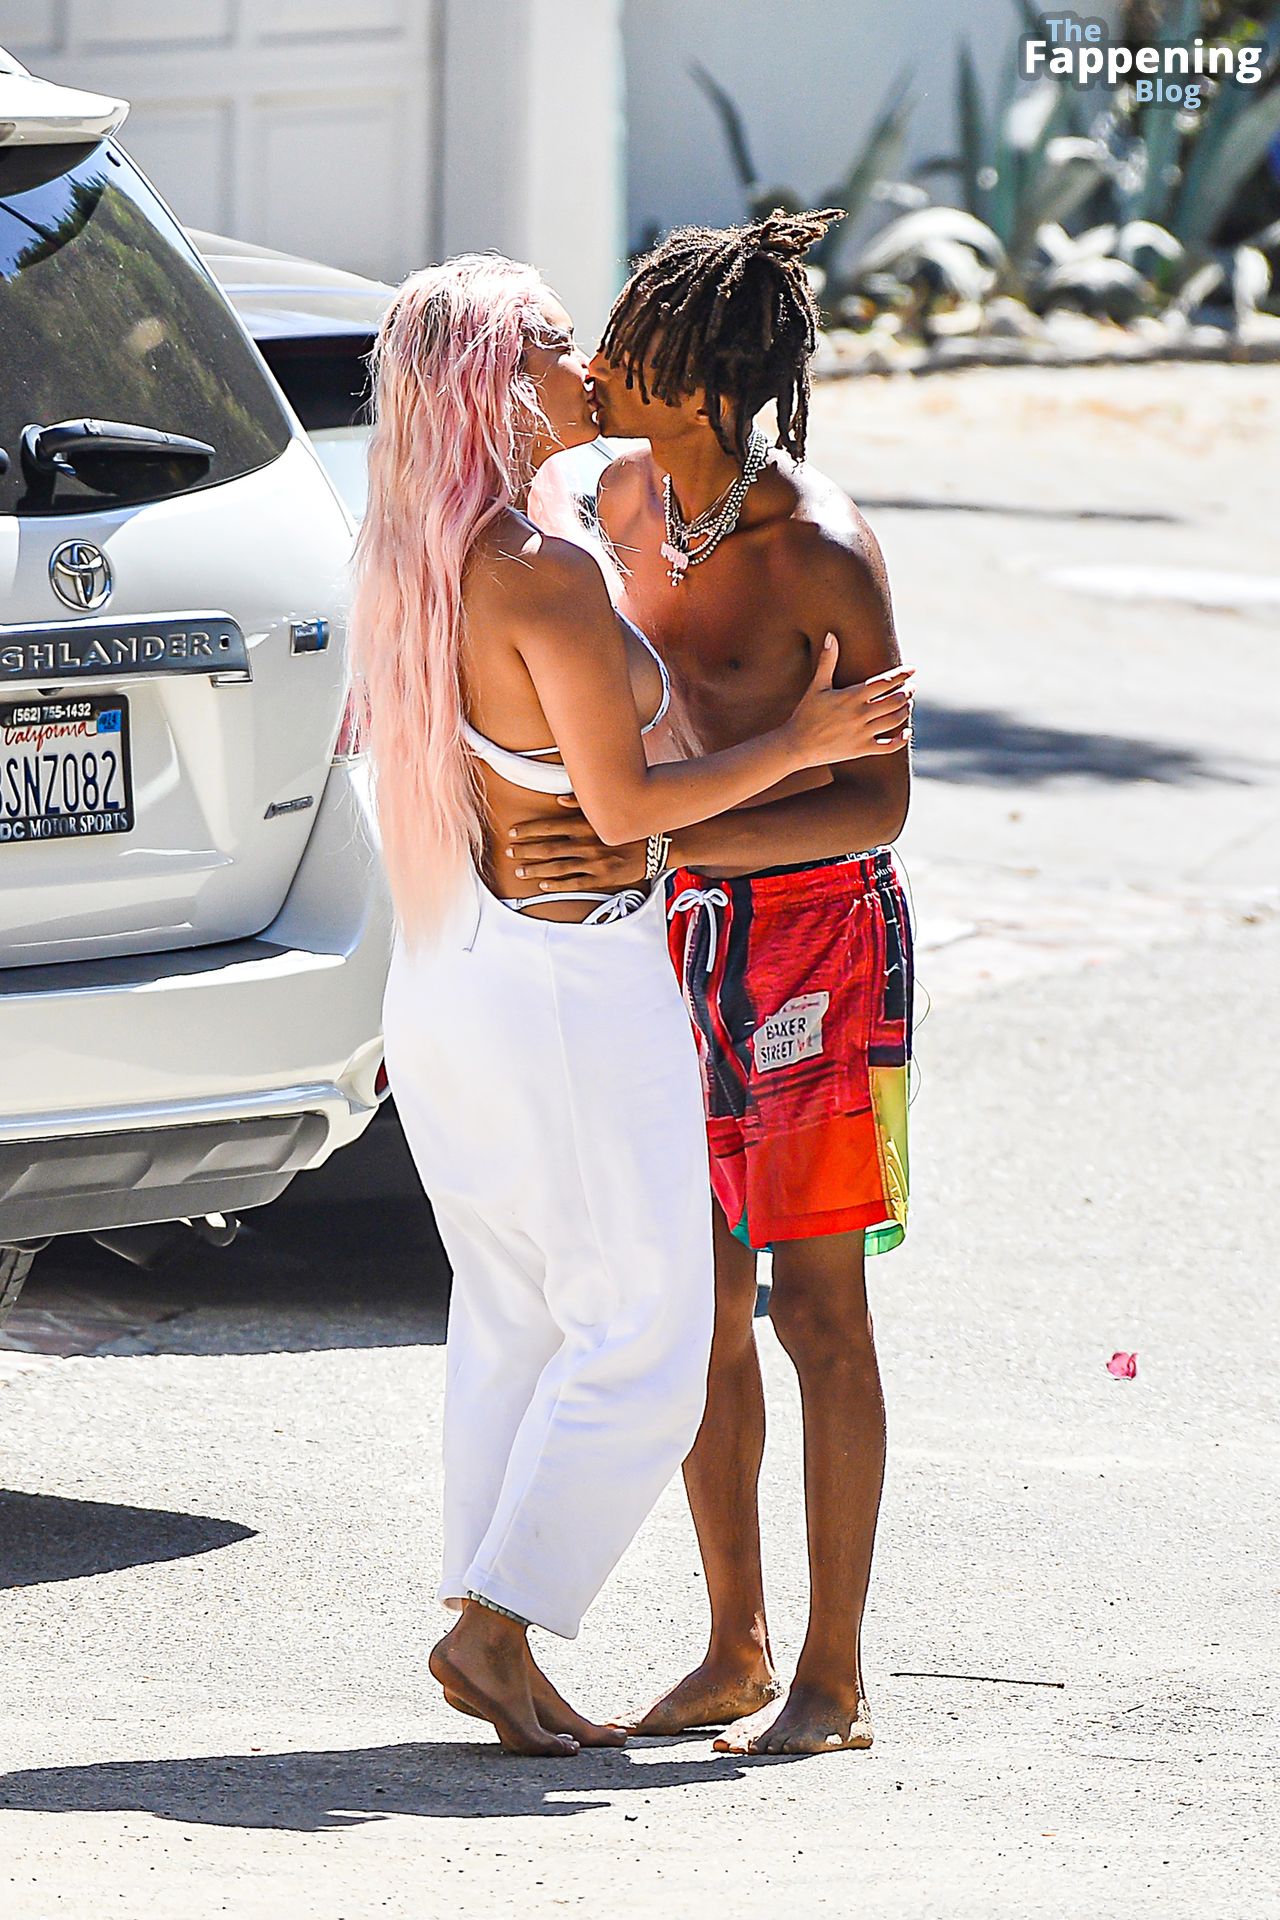 Jaden Smith Puts His Hand On The Belly of His Girlfriend Sab Zada While Having a Beach Day in Malibu (Photos)